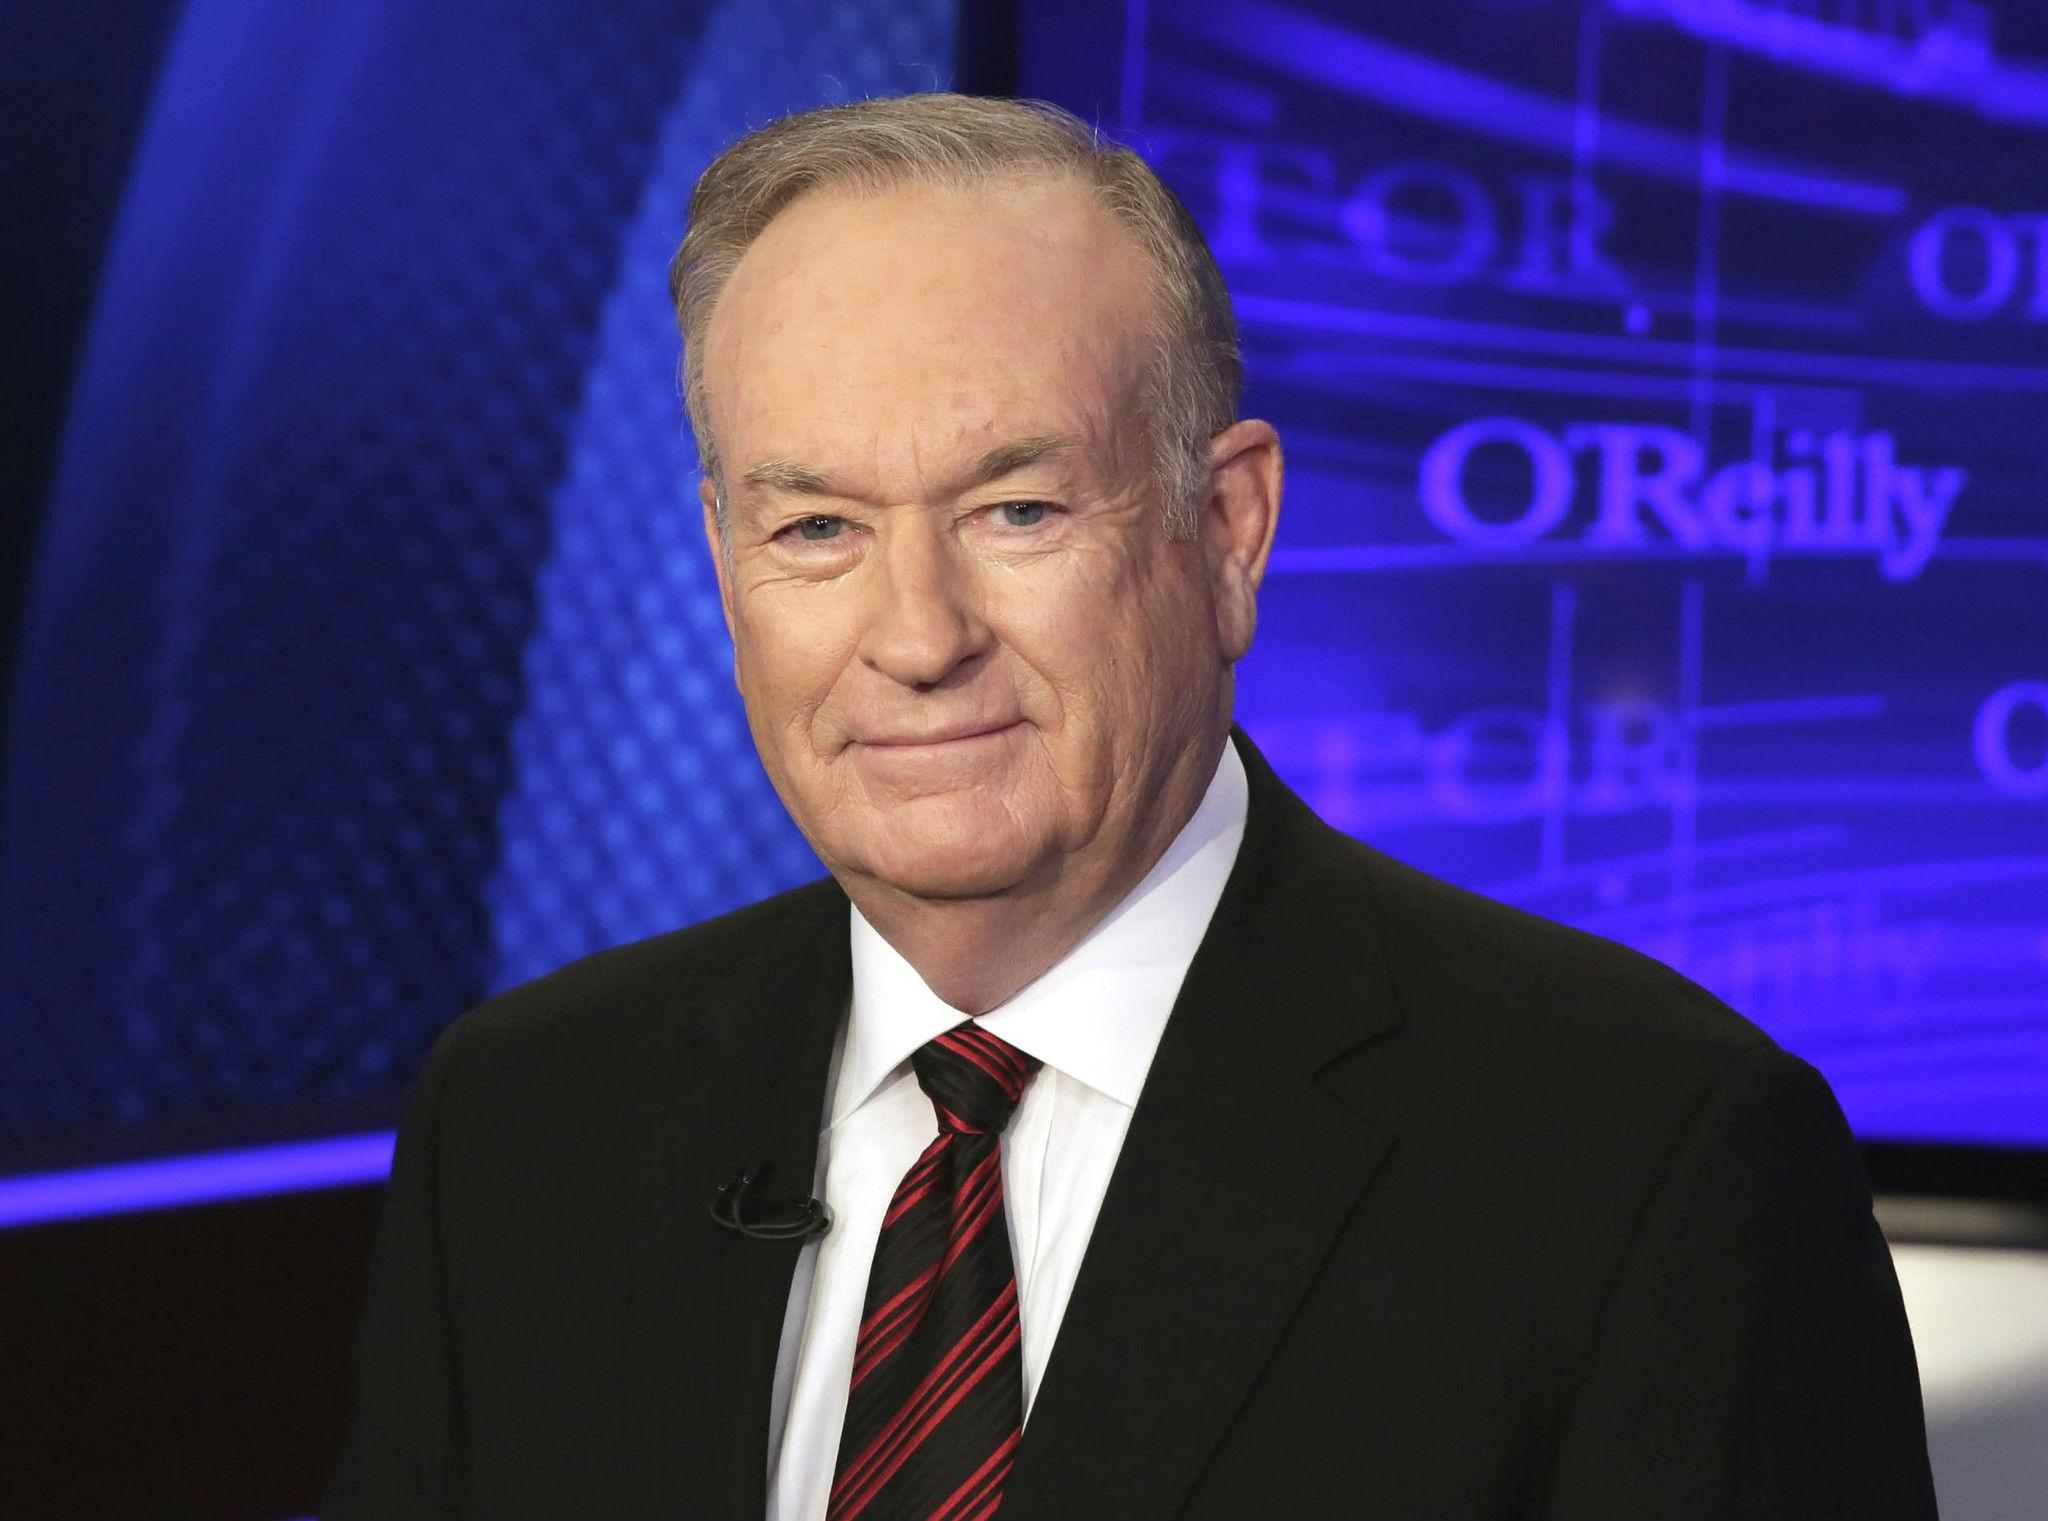 The 67-year-old O'Reilly has denied the allegations